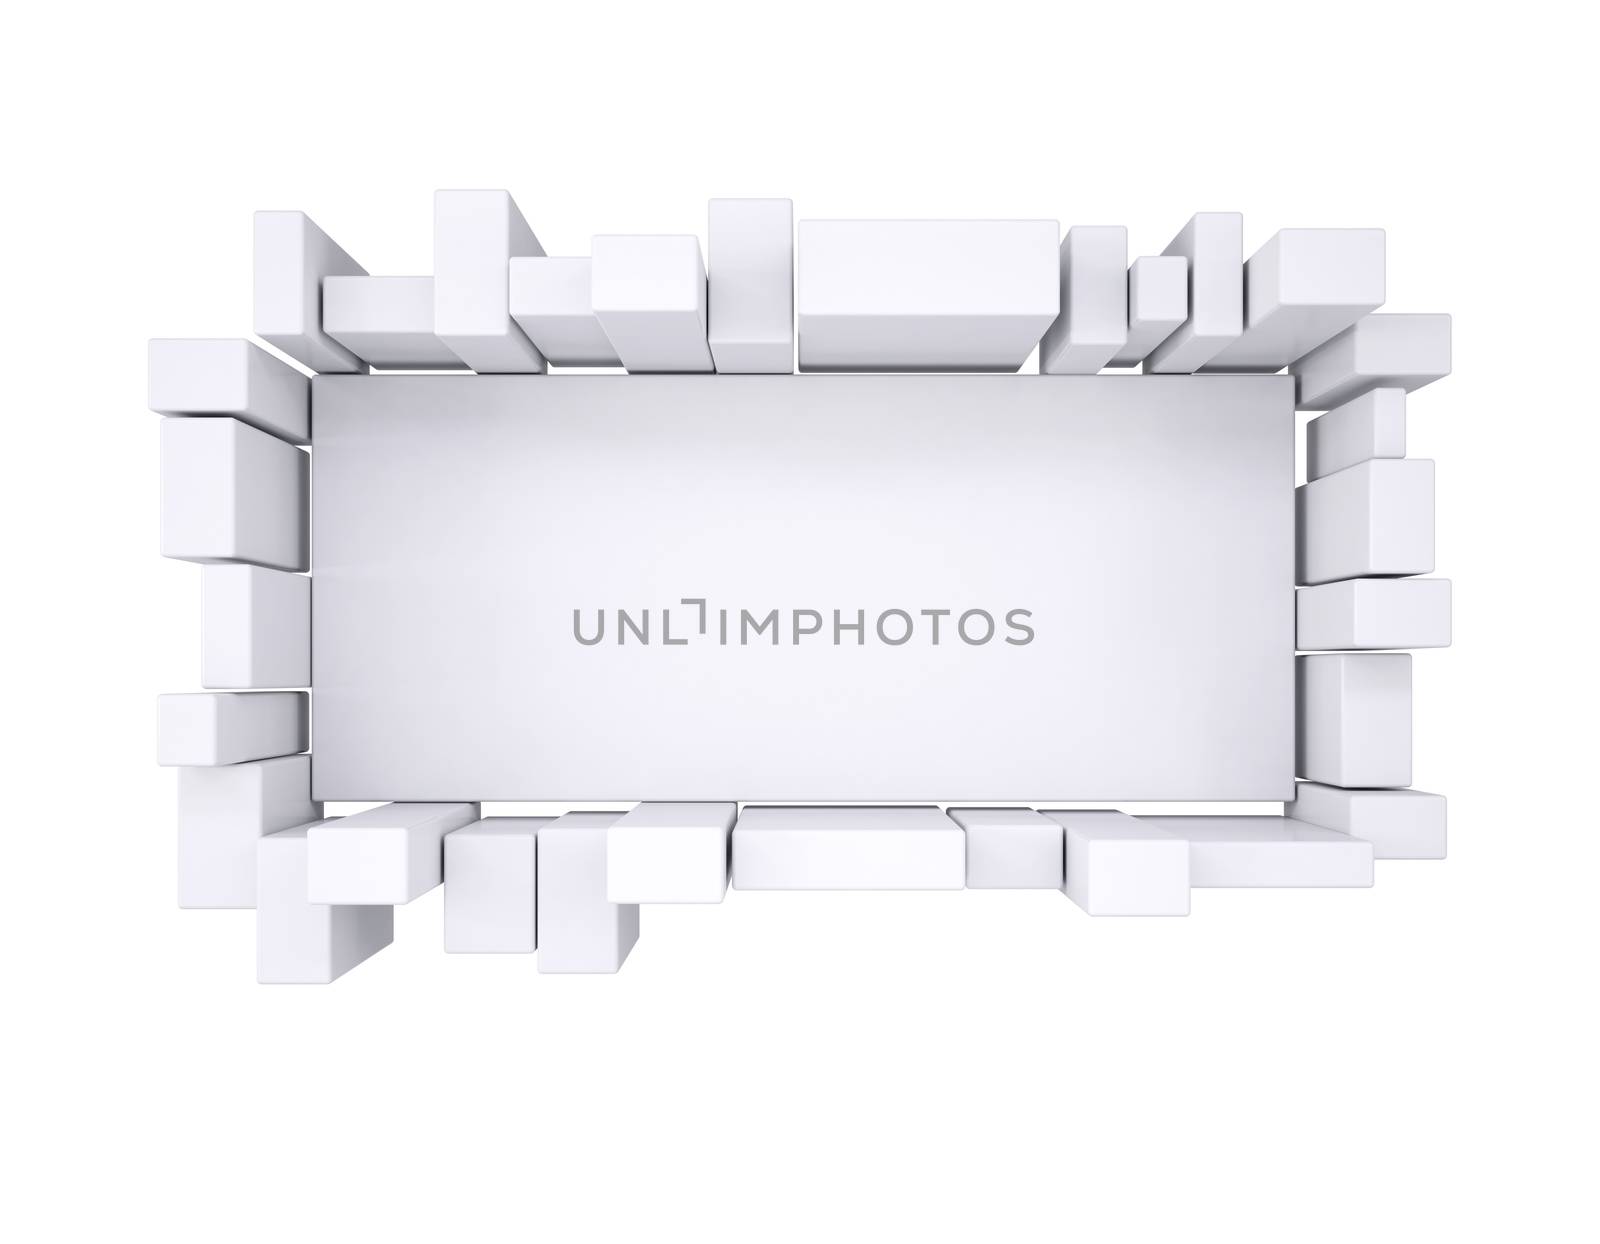 Advertising board. Isolated render on a white background